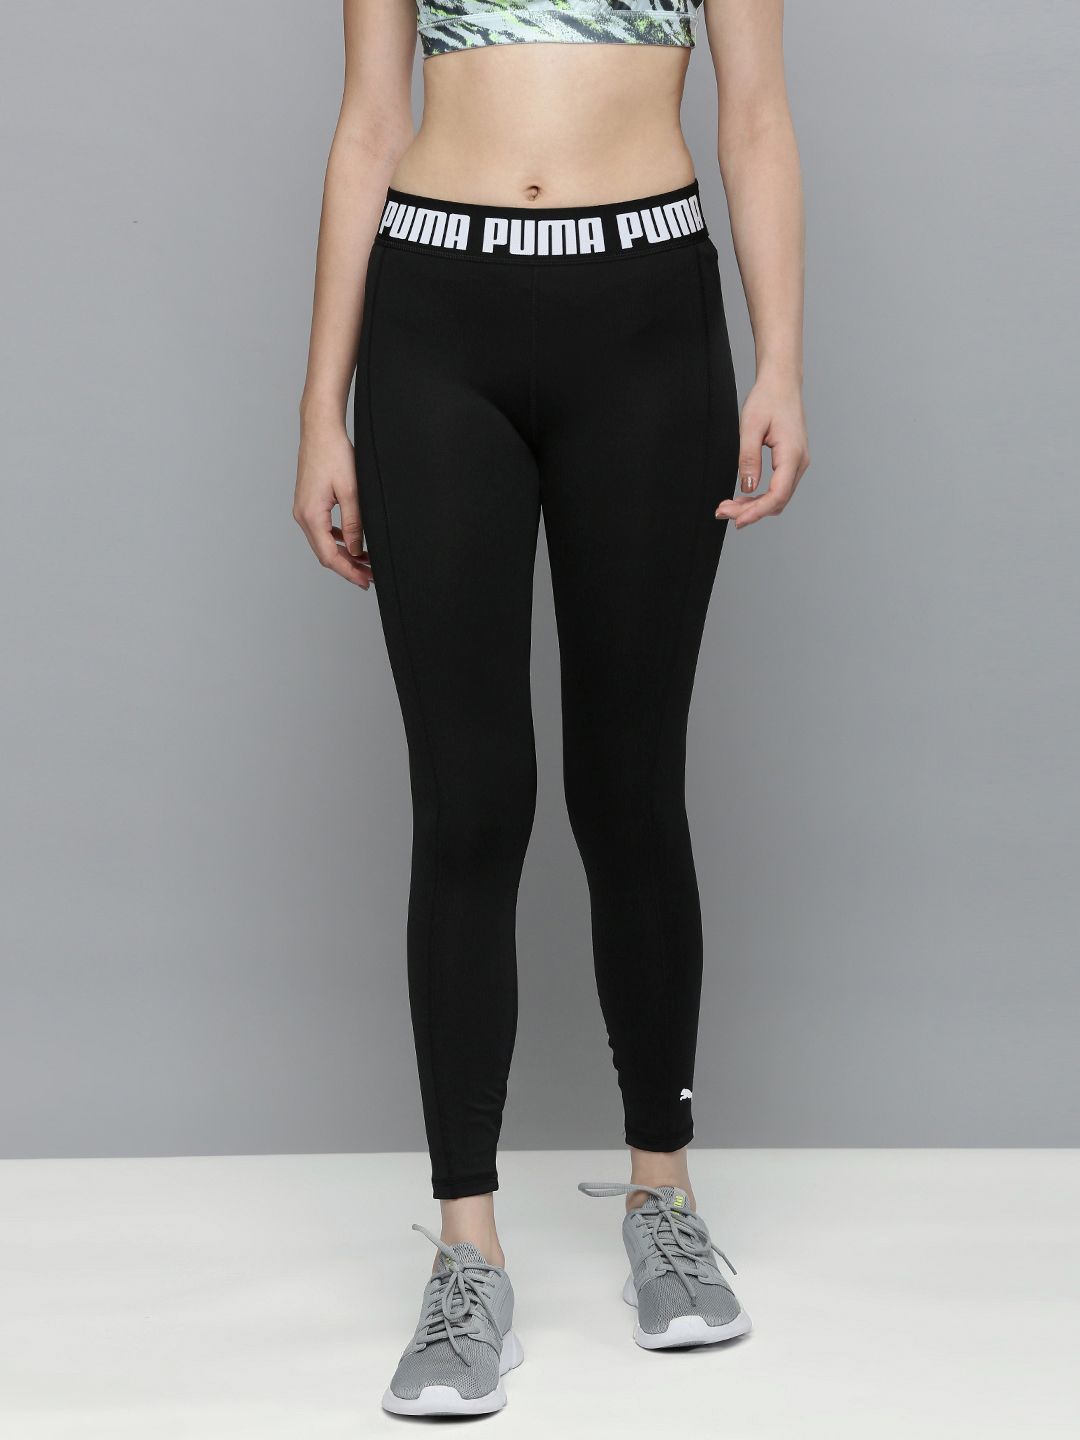 Puma Women Black Brand Logo Printed Strong High Waisted Training Tights Price in India